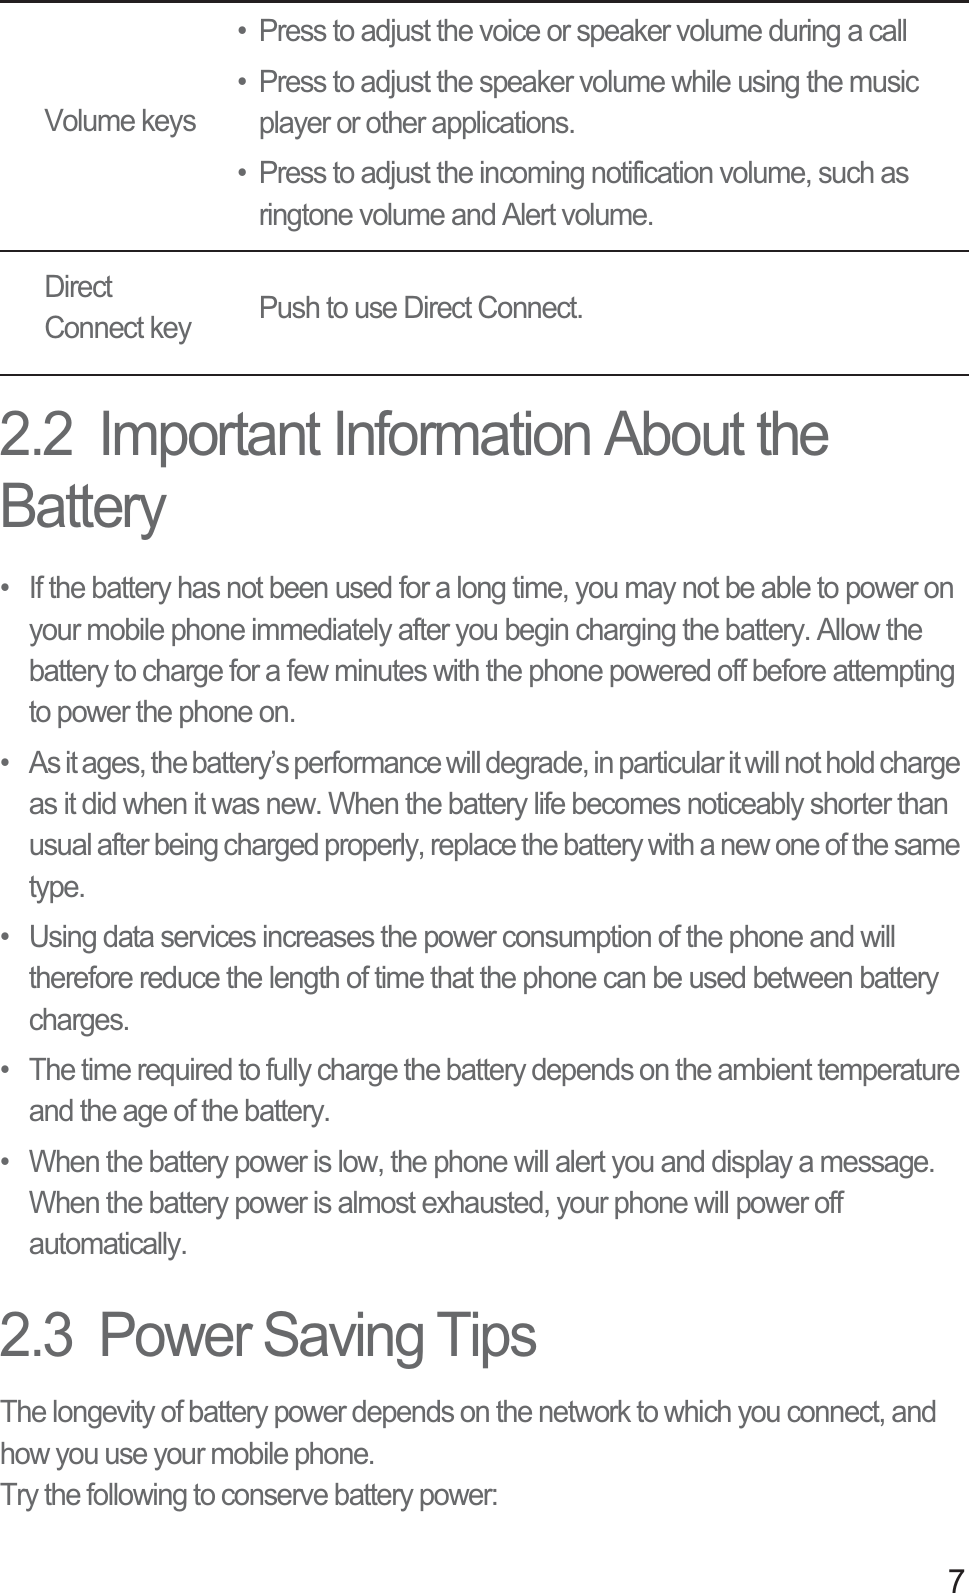 72.2  Important Information About the Battery•  If the battery has not been used for a long time, you may not be able to power on your mobile phone immediately after you begin charging the battery. Allow the battery to charge for a few minutes with the phone powered off before attempting to power the phone on.•  As it ages, the battery’s performance will degrade, in particular it will not hold charge as it did when it was new. When the battery life becomes noticeably shorter than usual after being charged properly, replace the battery with a new one of the same type.•  Using data services increases the power consumption of the phone and will therefore reduce the length of time that the phone can be used between battery charges.•  The time required to fully charge the battery depends on the ambient temperature and the age of the battery.•  When the battery power is low, the phone will alert you and display a message. When the battery power is almost exhausted, your phone will power off automatically.2.3  Power Saving Tips The longevity of battery power depends on the network to which you connect, and how you use your mobile phone.Try the following to conserve battery power:Volume keys• Press to adjust the voice or speaker volume during a call• Press to adjust the speaker volume while using the music player or other applications.• Press to adjust the incoming notification volume, such as ringtone volume and Alert volume.Direct Connect key Push to use Direct Connect.